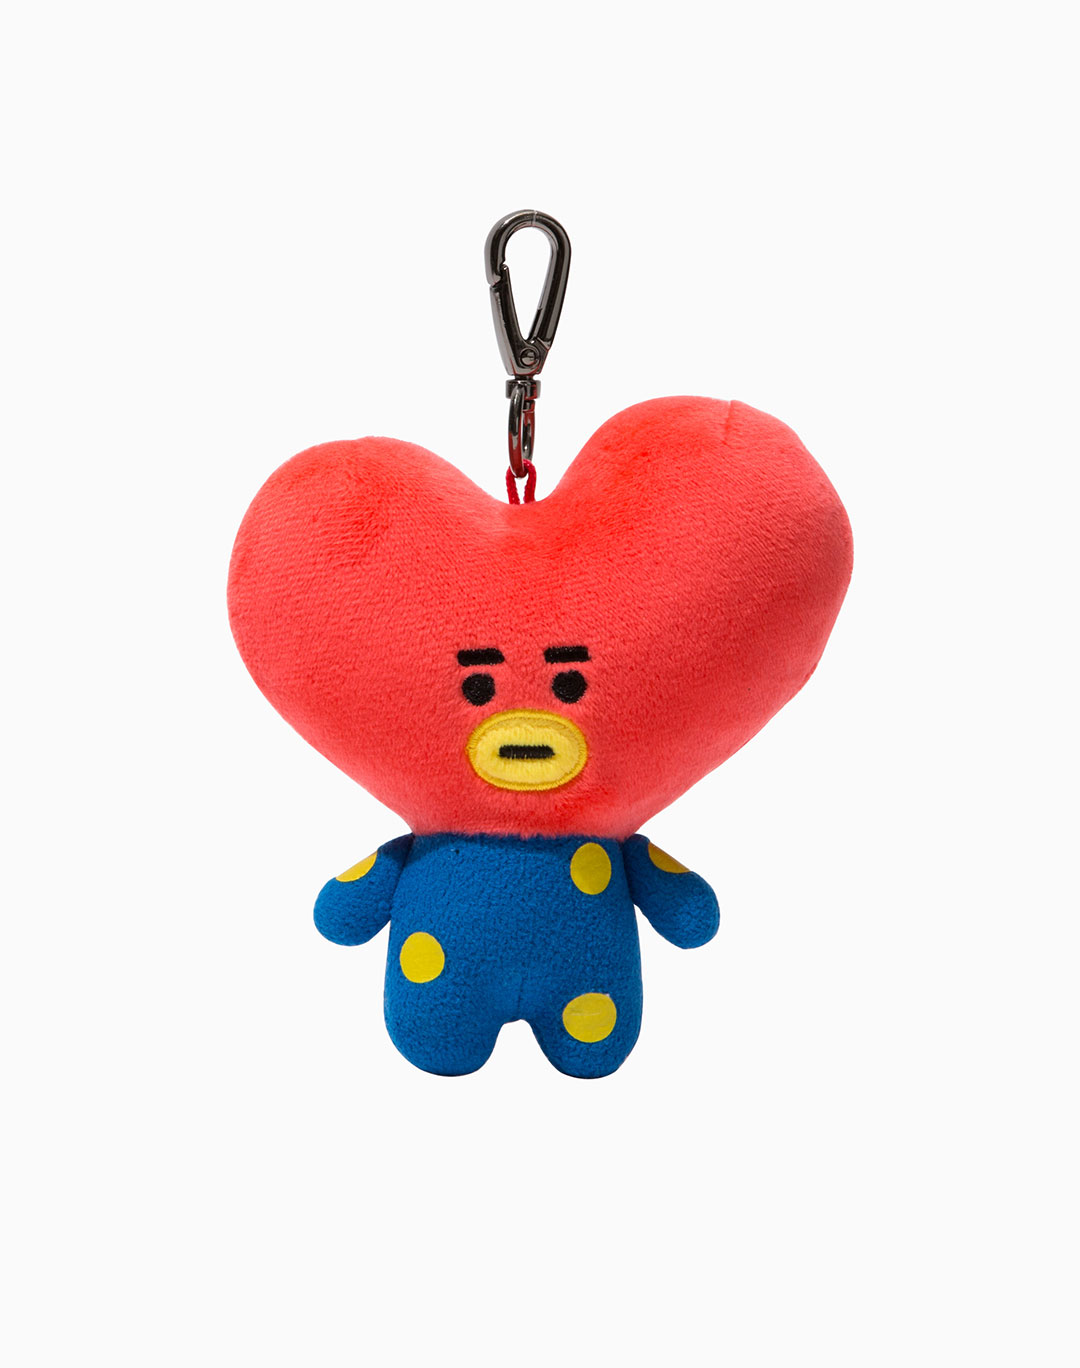 Bt21 Official Merchandise Tata Character Winter Standing Plush Toy Doll 11 Inch for sale online 